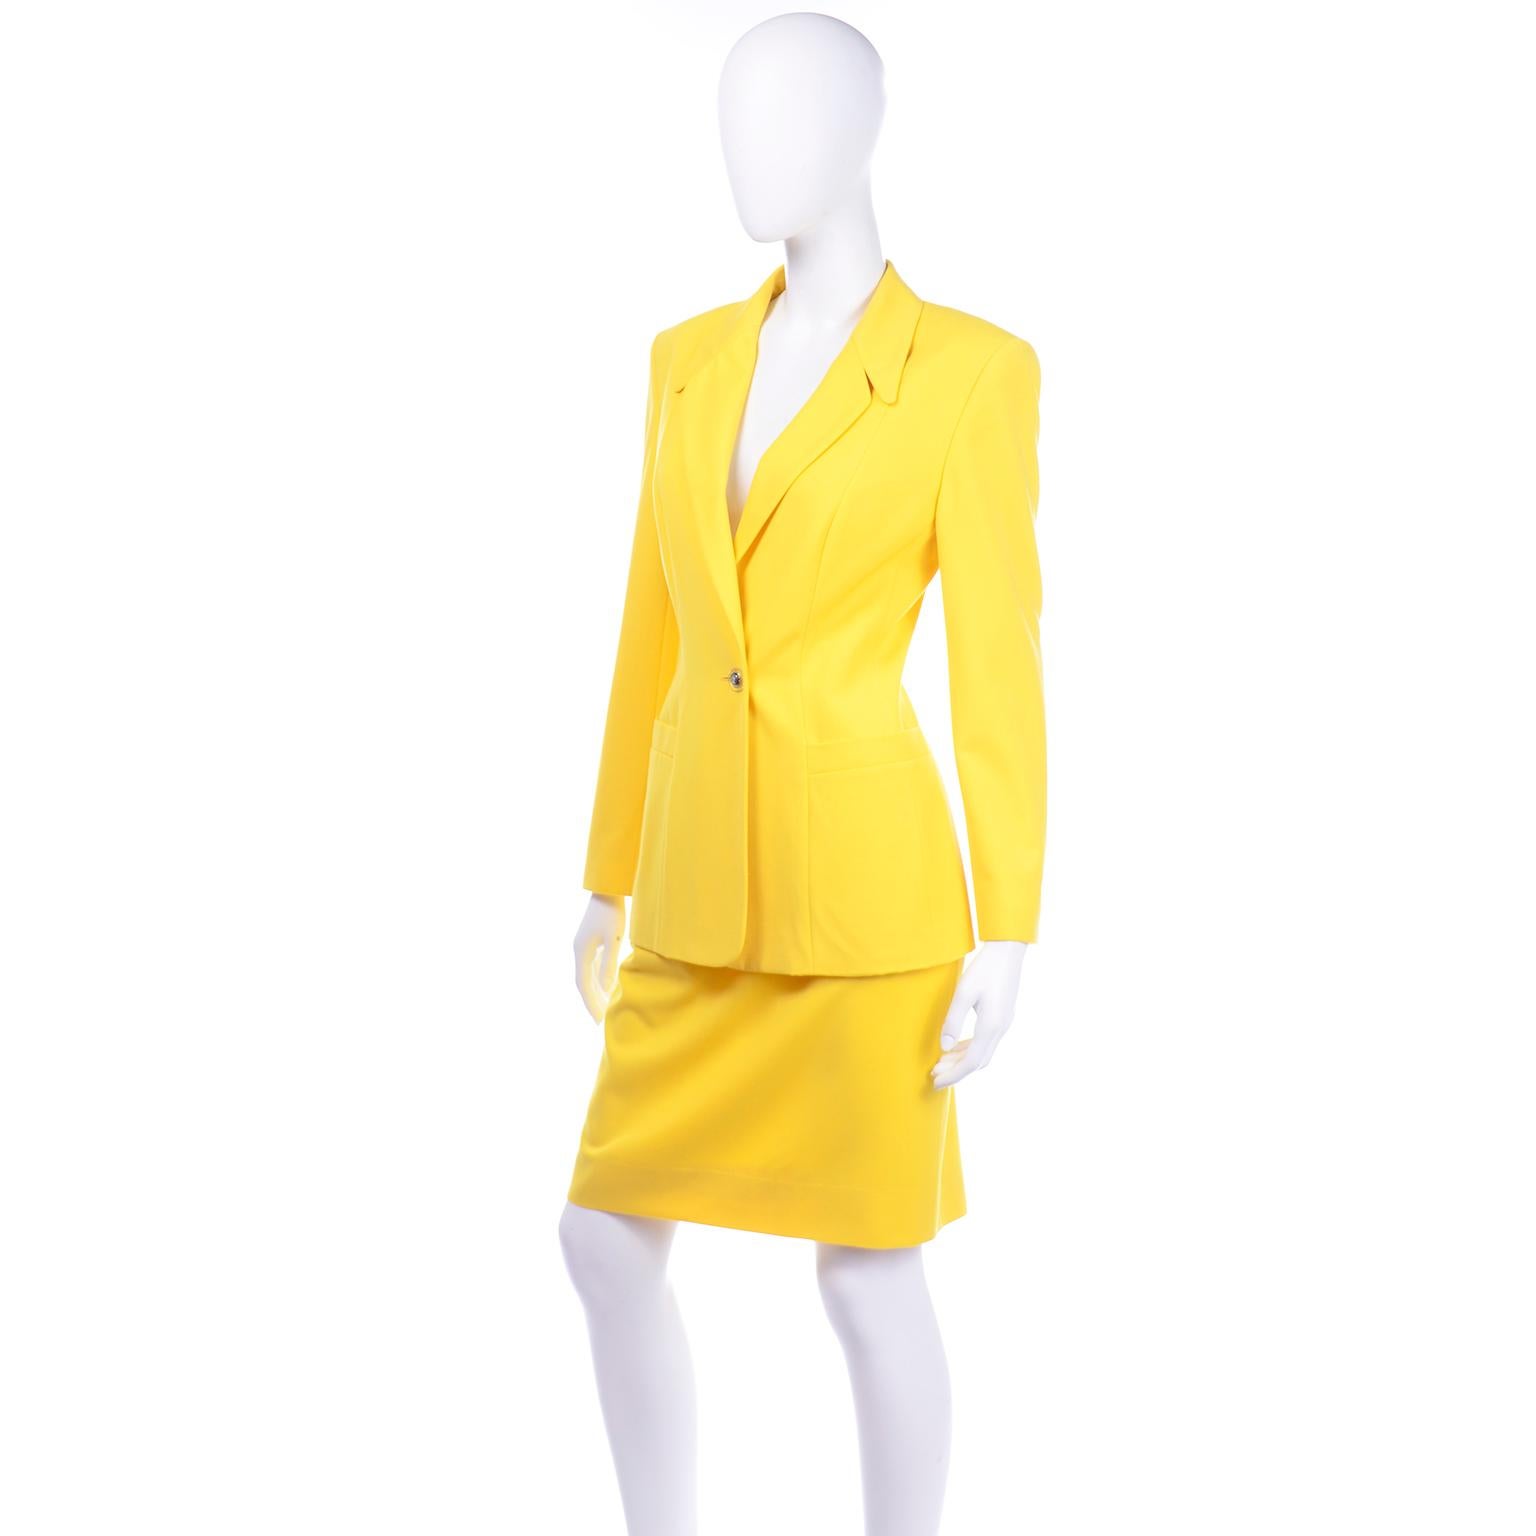 Vintage Escada Yellow Skirt and Longline Blazer Suit Margaretha Ley In Excellent Condition For Sale In Portland, OR